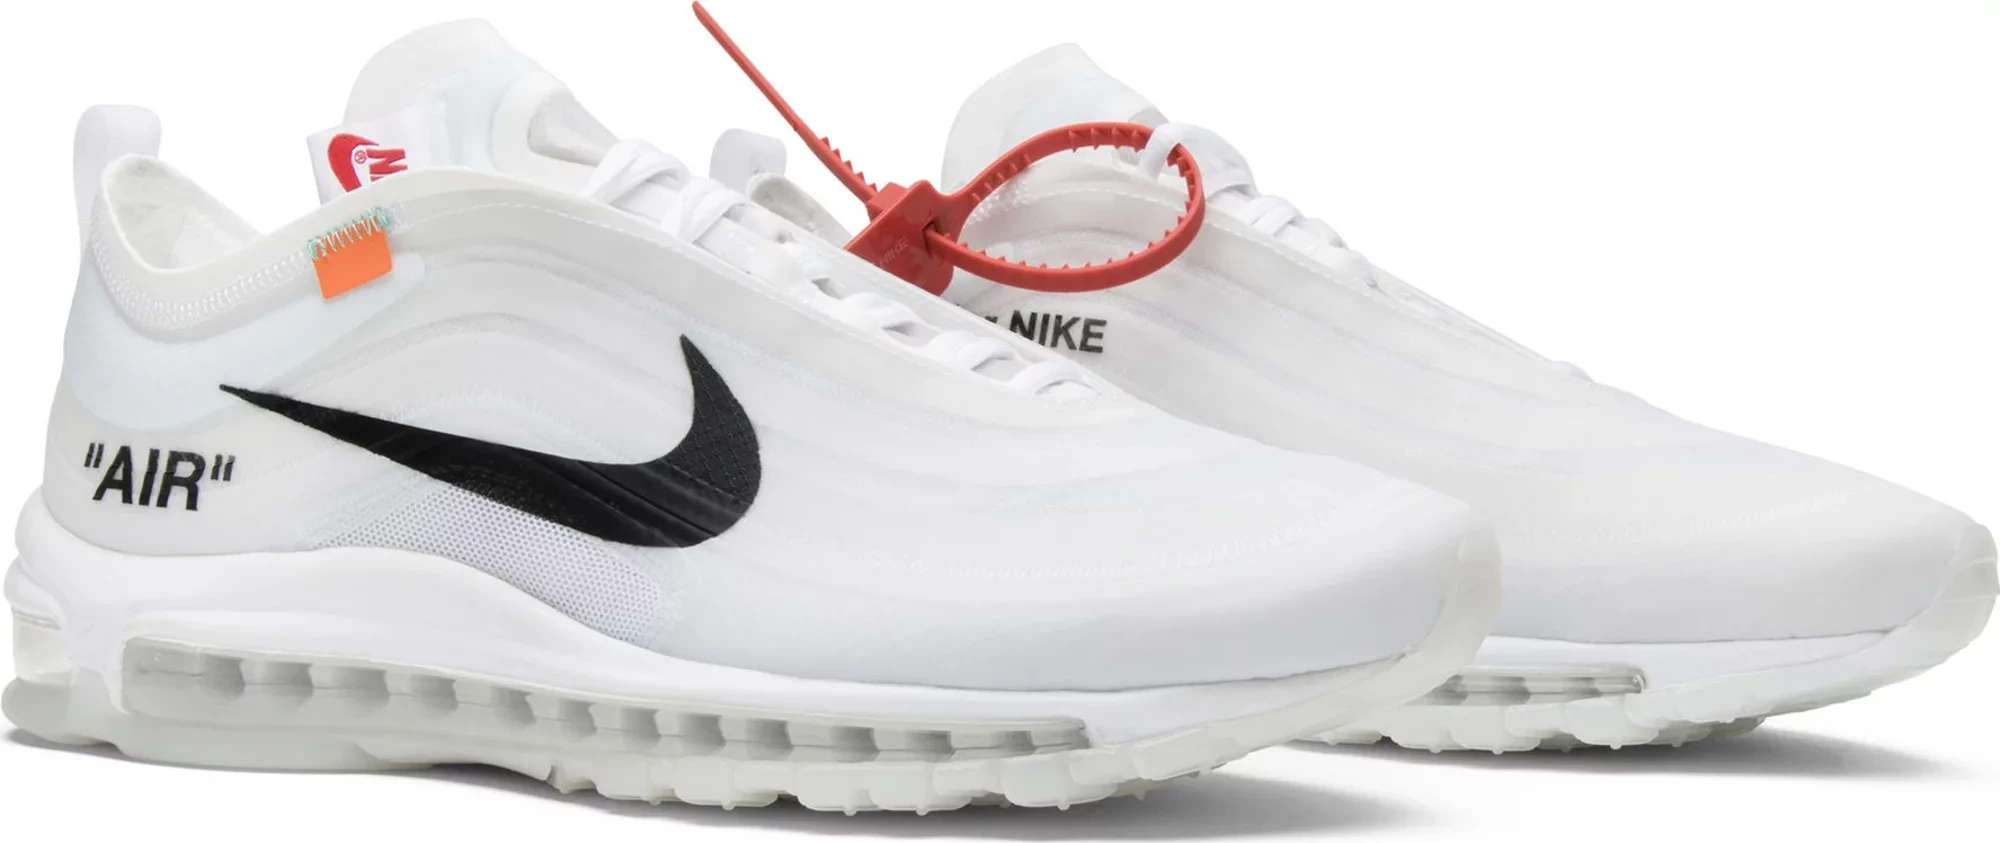 confesar Bajar sitio Off-White x Air Max 97 OG The Ten – Sneakers Joint